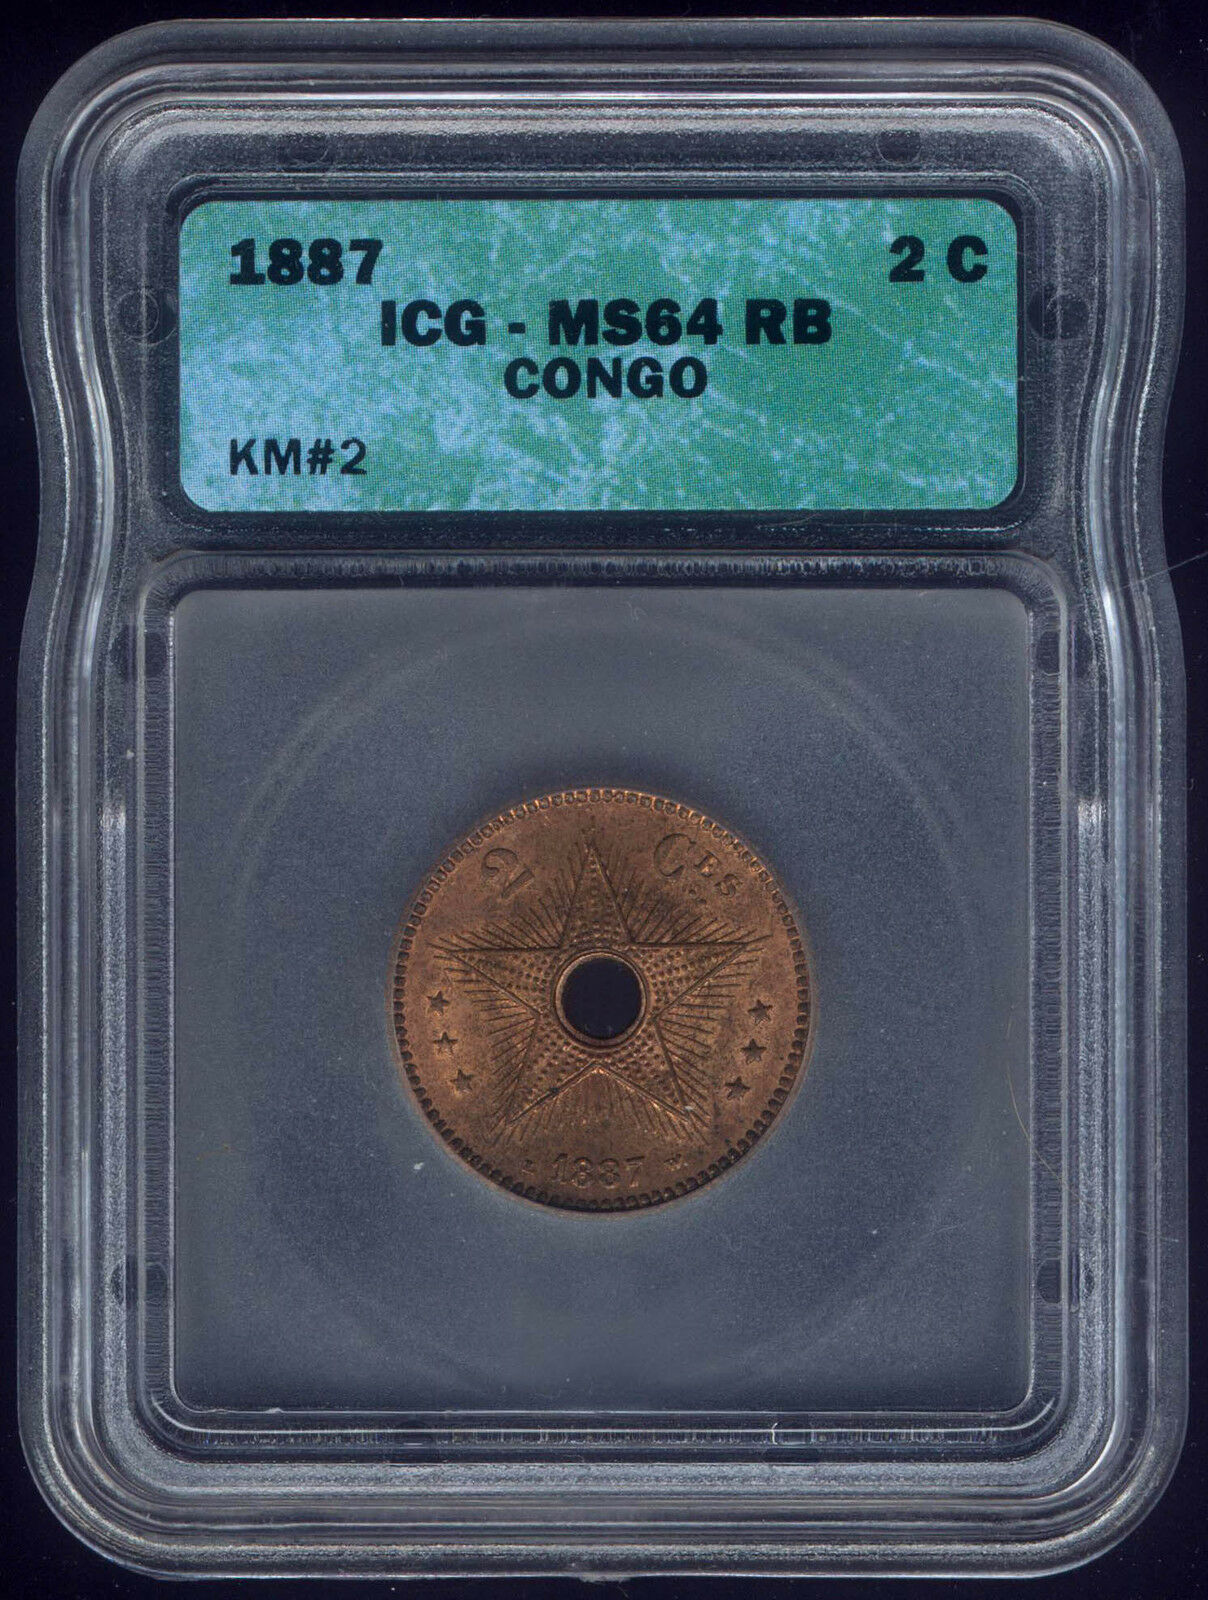 CONGO 1887 ICG SLAB GRADED MS ( MINT STATE ) 64 - TWO ( 2 ) CENTIMES COIN KM # 2